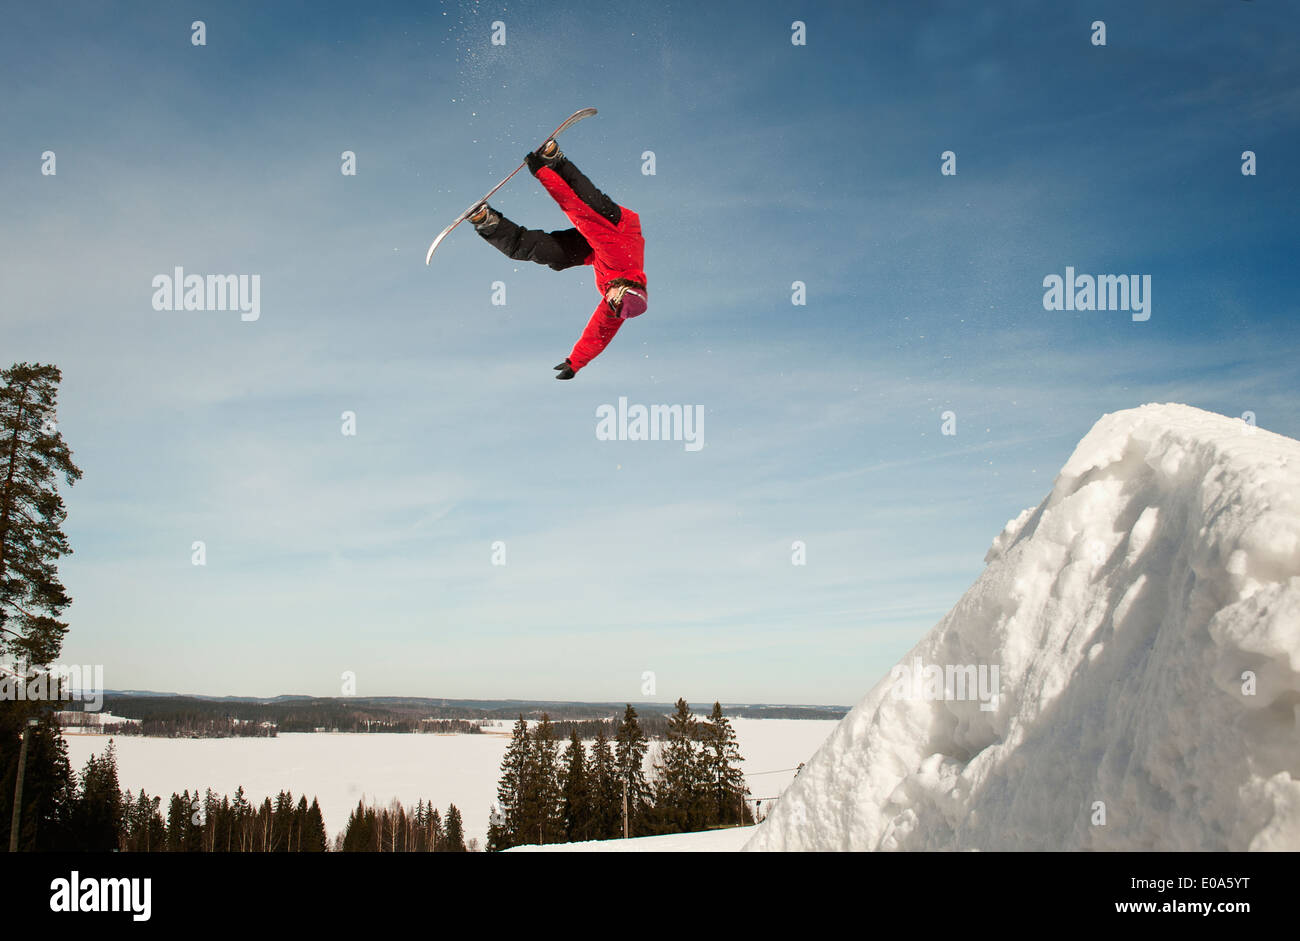 Mid adult male snowboarder upside down during mid air jump Stock Photo